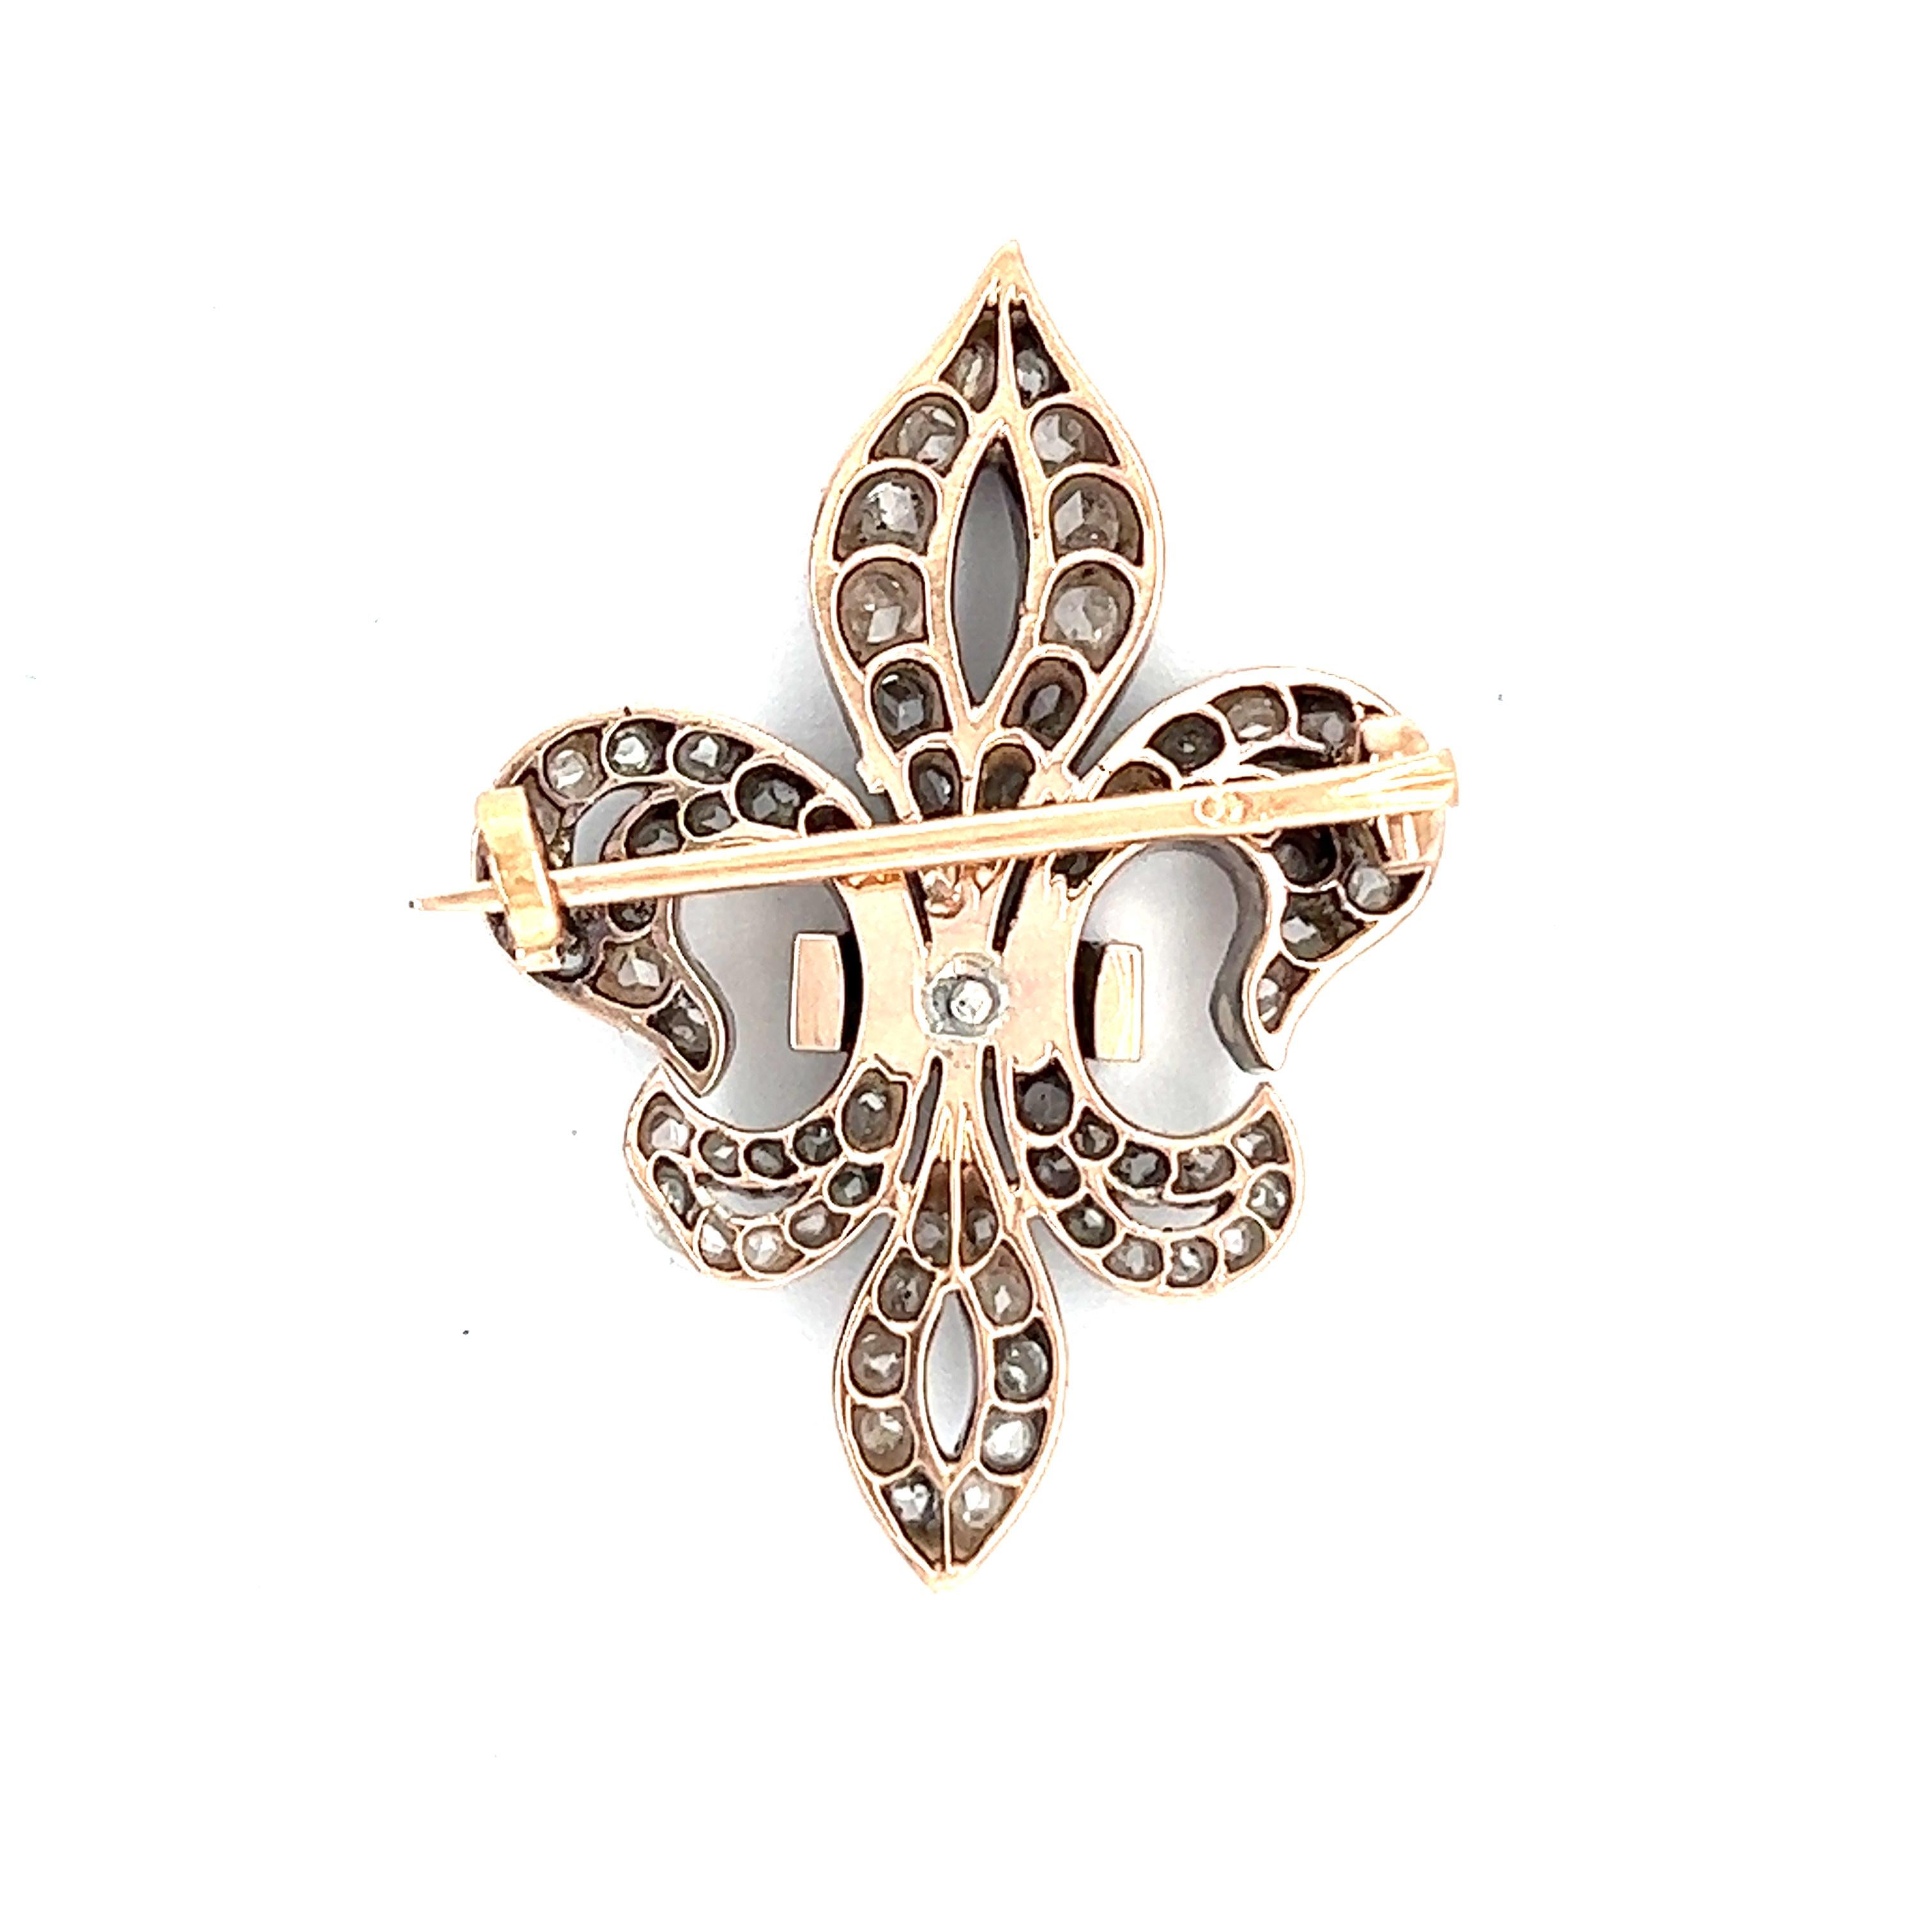 One Antique French Rose Cut Diamond 18 Karat Gold Fleur de Lis Brooch. Featuring 75 rose cut diamonds with a total weight of approximately 2.40 carats, graded G-H color, SI clarity. Crafted in 18 karat rose gold topped with silver, with French